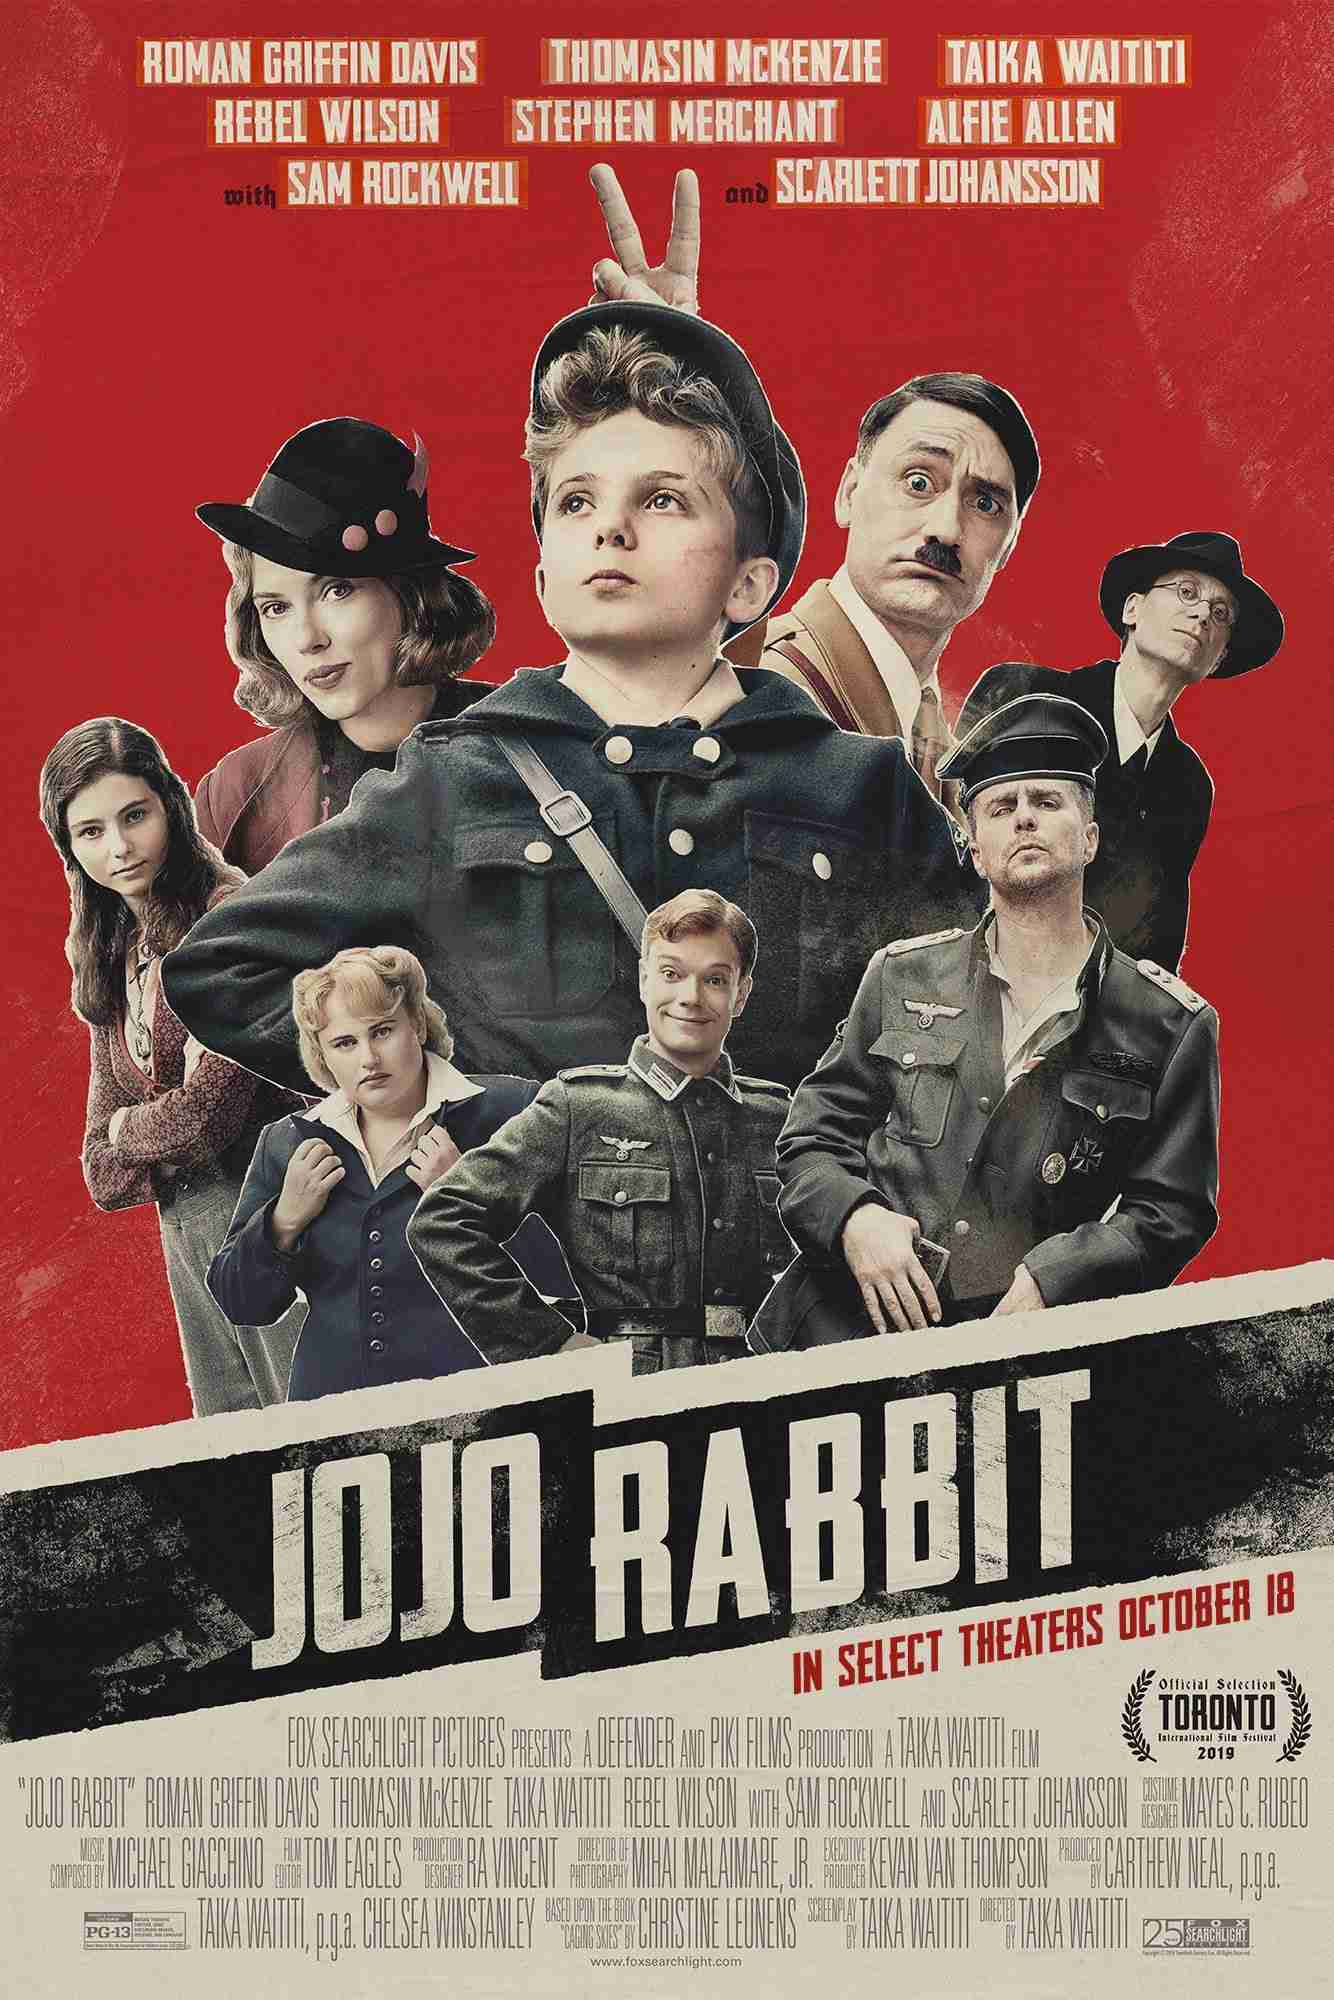 Just in case it flew over your head, the message of Jojo Rabbit (2019) is that Nazism and indoctrination are bad - don't get involved in those things.